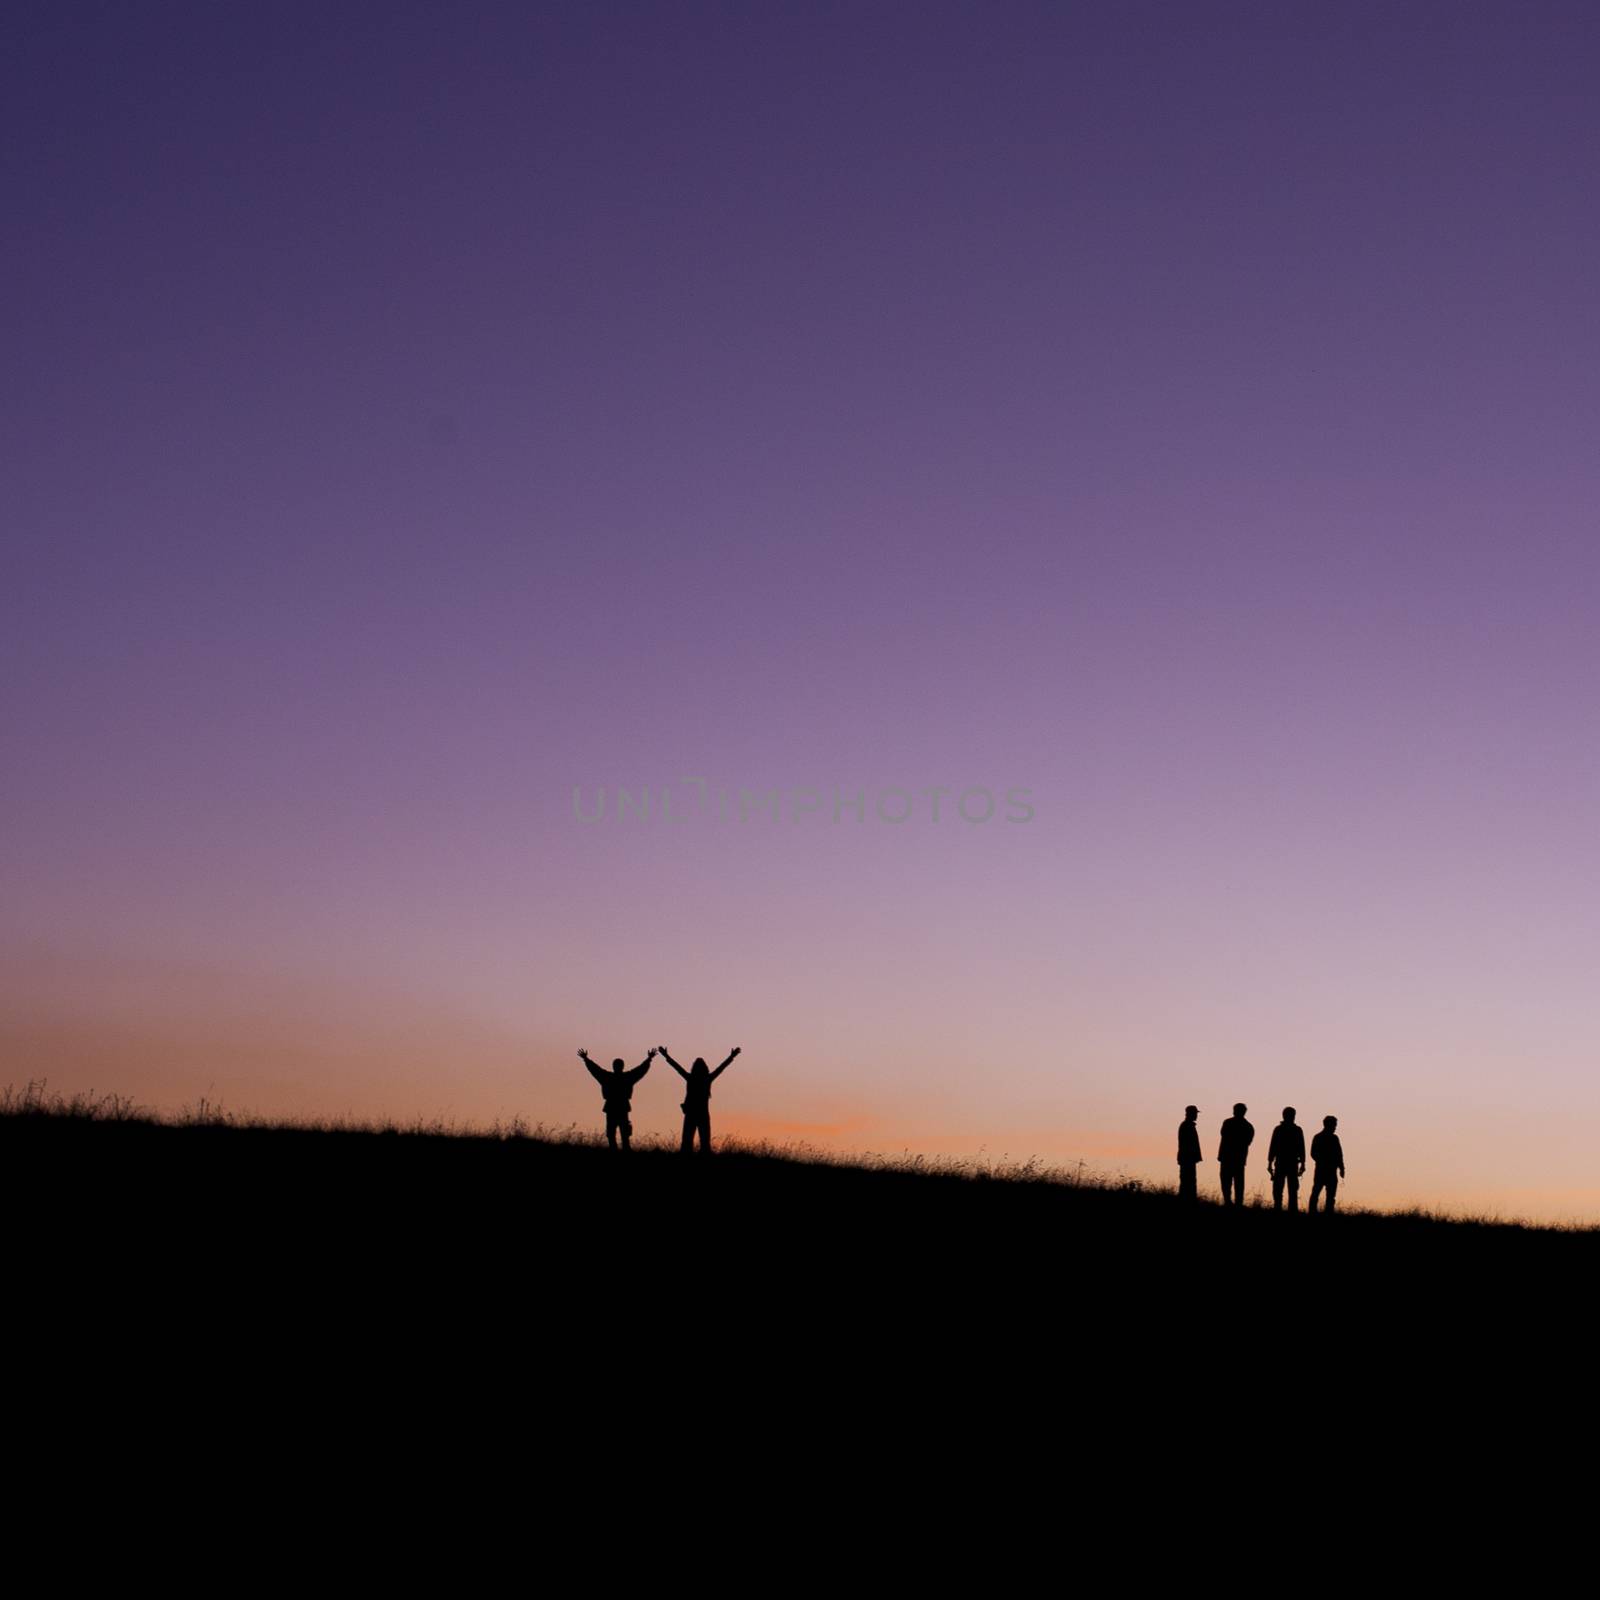 six children jumping for joy on mountain silhouette sunset  by 2nix